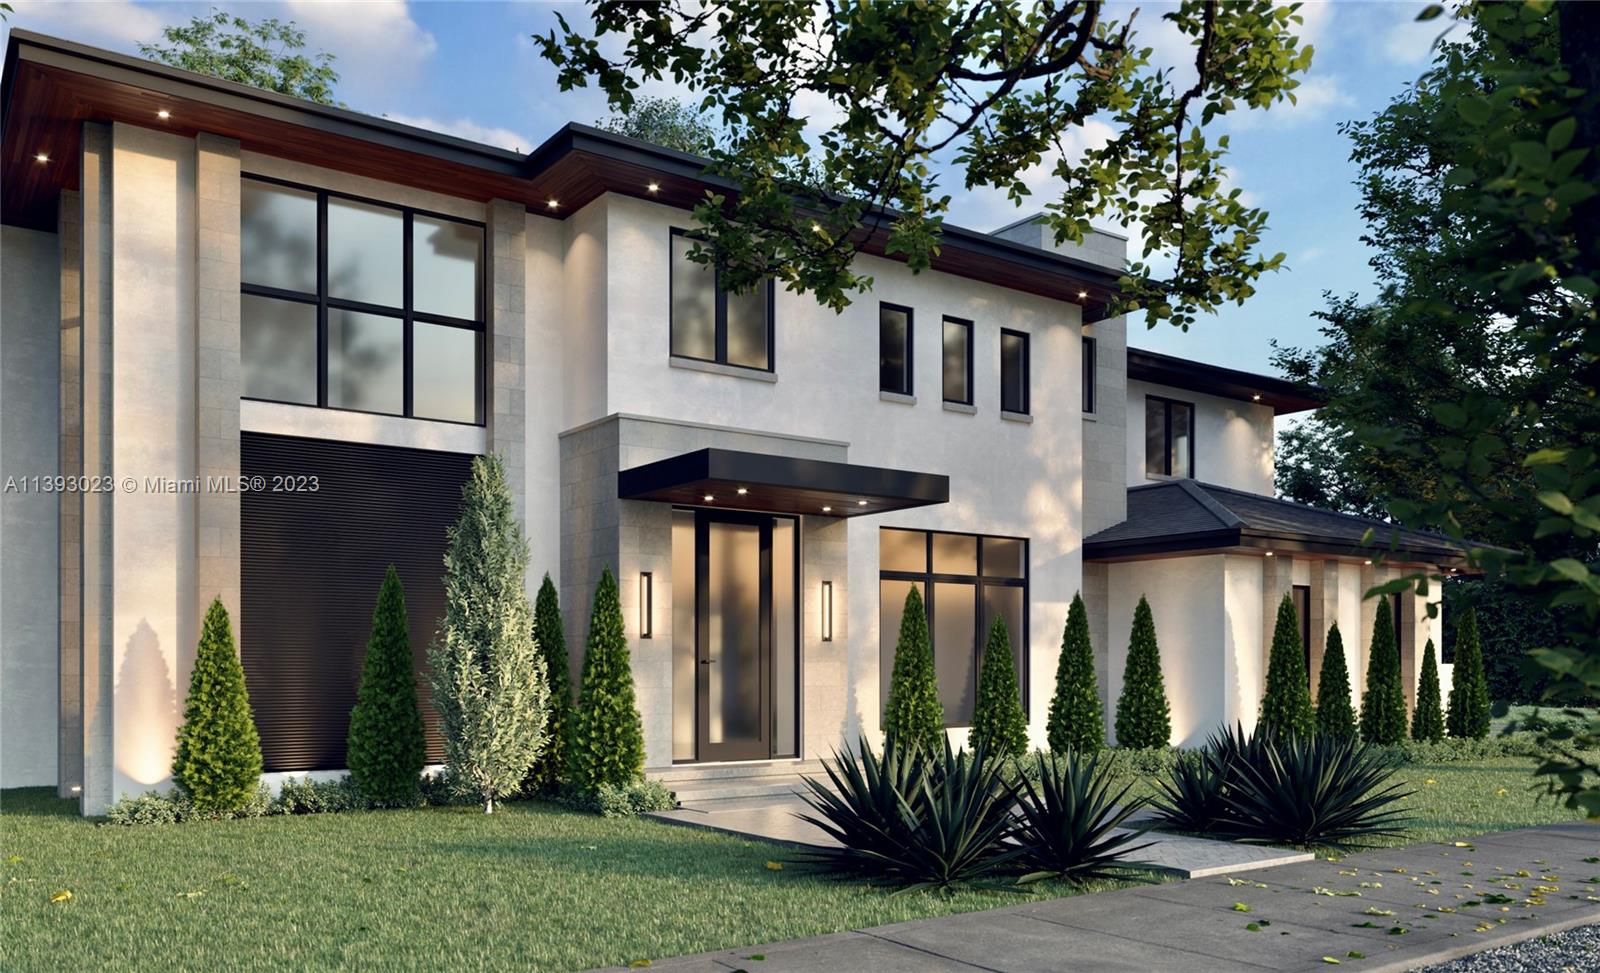 Rare pre-construction opportunity to buy a spectacular new home in the highly sought after Coral Gables neighborhood known as the Platinum Triangle. Expected completion Spring 2024. To be built on a 10,043 SF lot near the Cocoplum Circle, which connects the scenic & tree-canopied roadways of Ingraham Highway, Sunset Drive & Old Cutler Road. Pacheco Architecture has designed this 5618 SF home that features: 6BR’s/6.5BA’s, Subzero & Wolf appliances, porcelain tile flooring, elevator, 2 car garage & pool. Close to all of the best that Miami has to offer: world-class dining & shopping in Coral Gables, Coconut Grove & South Miami and to highly acclaimed schools.